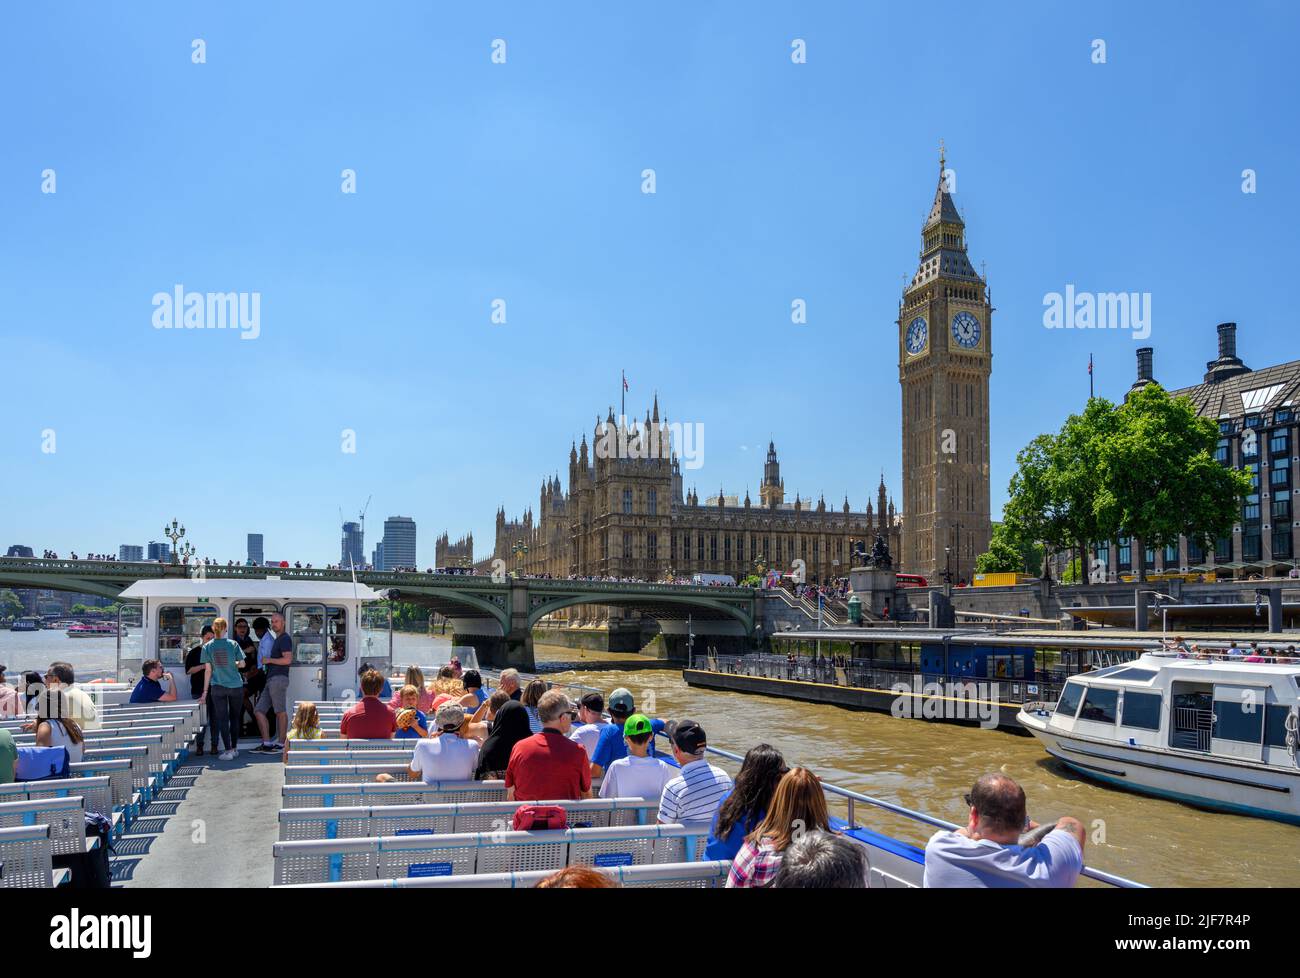 The Houses of Parliament (Palace of Westminster) from the deck of a City Cruises boat trip, River Thames, London, England, UK Stock Photo